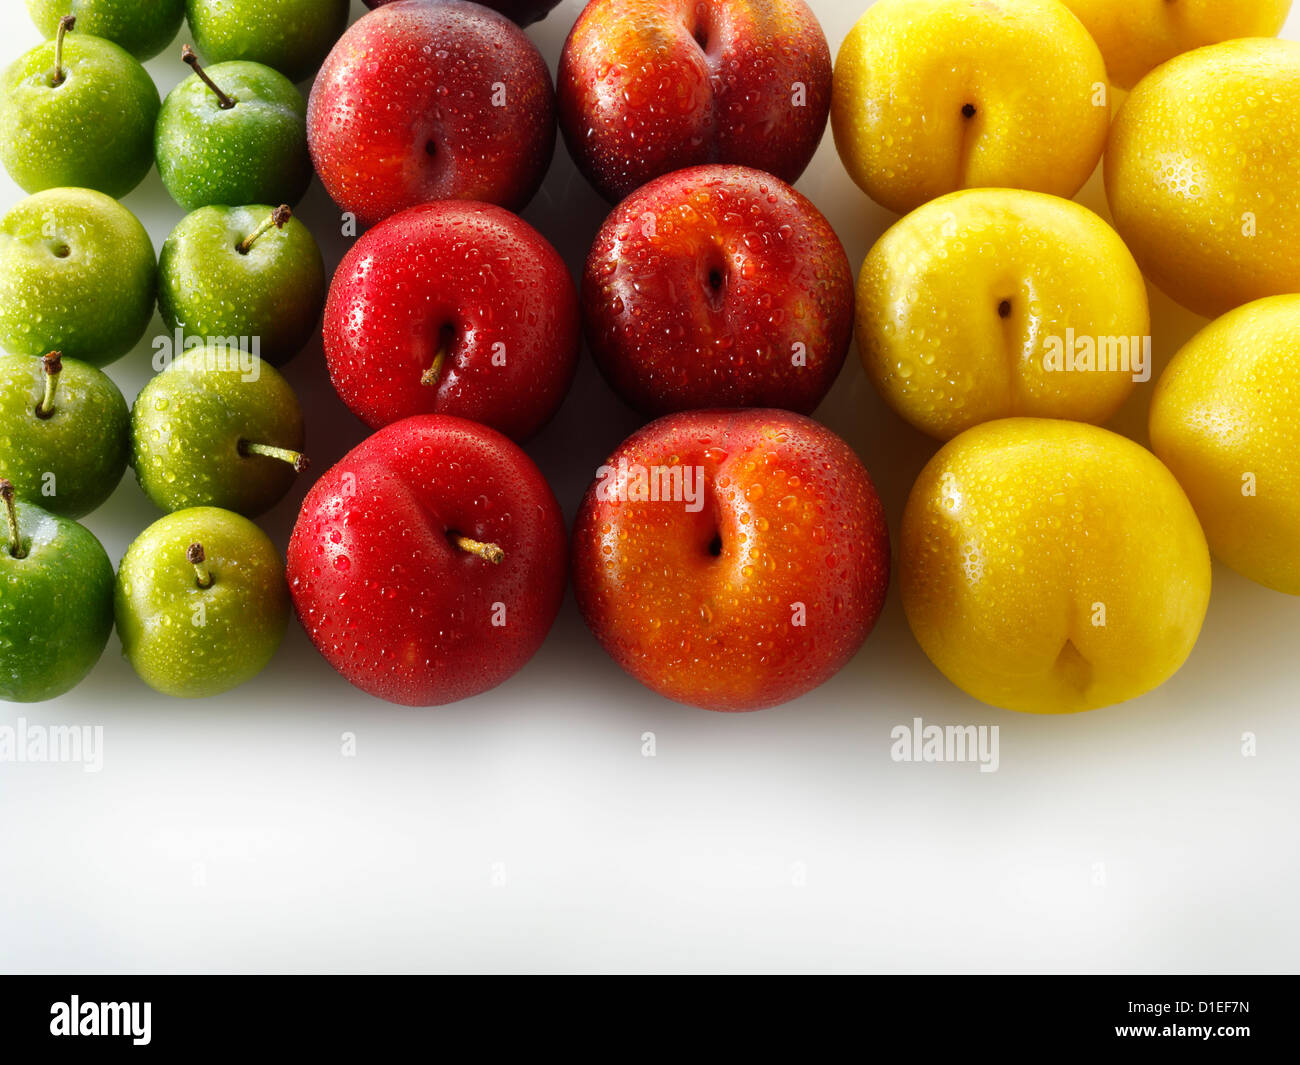 Mixed red, yellow and green plums Stock Photo